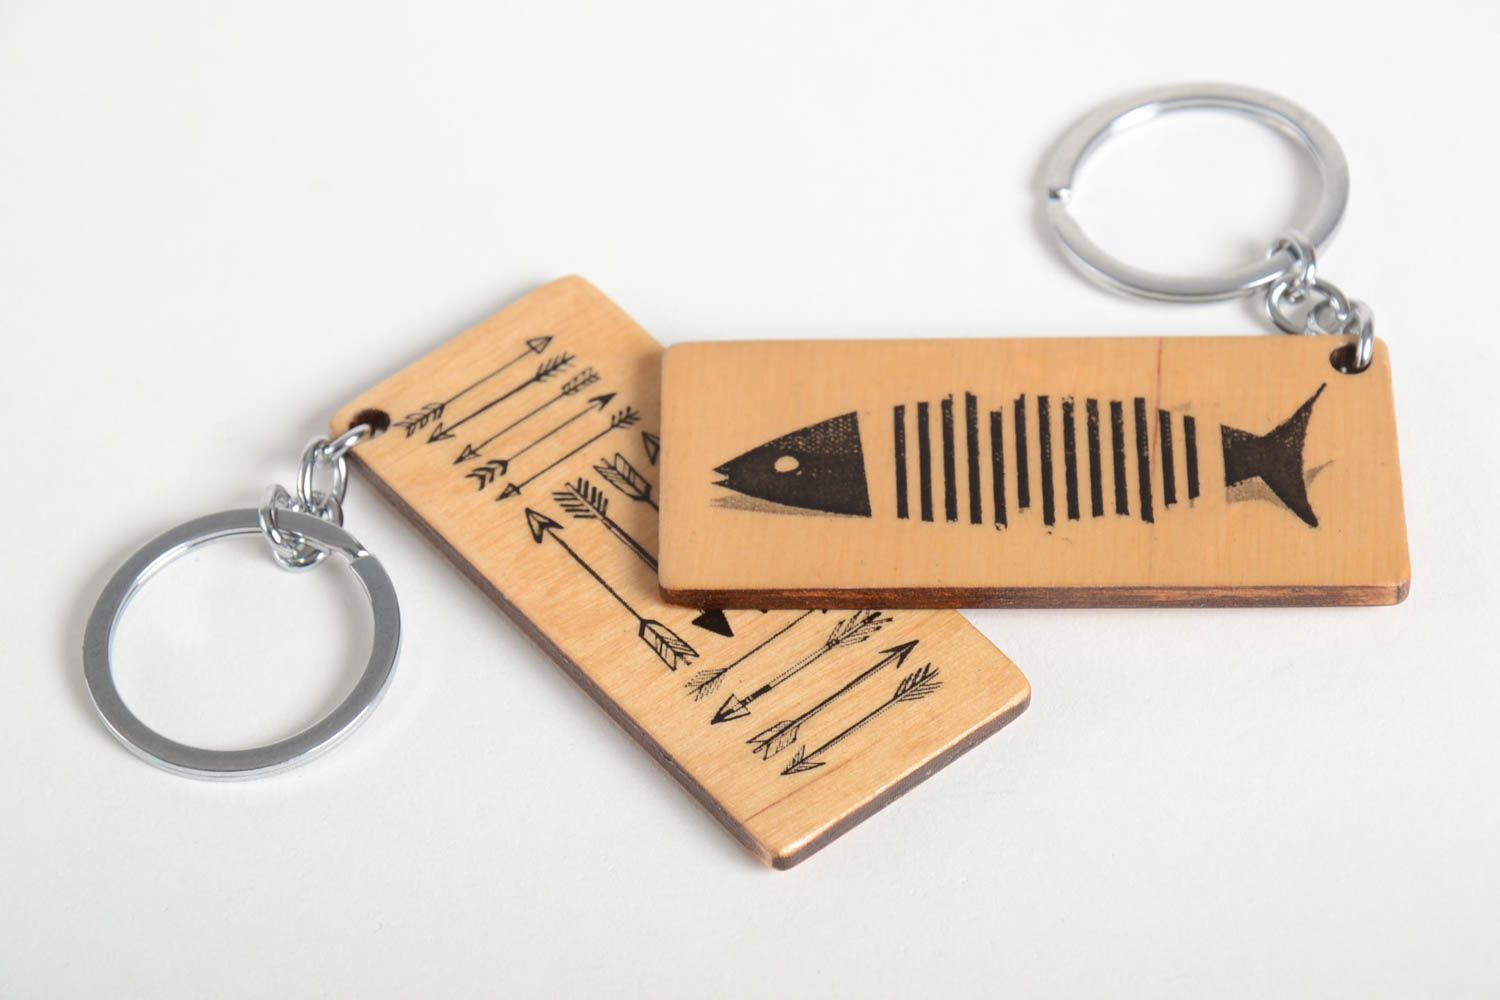 Handmade keychains dsigner keychains wooden souvenirs set of 2 items gift ideas photo 4